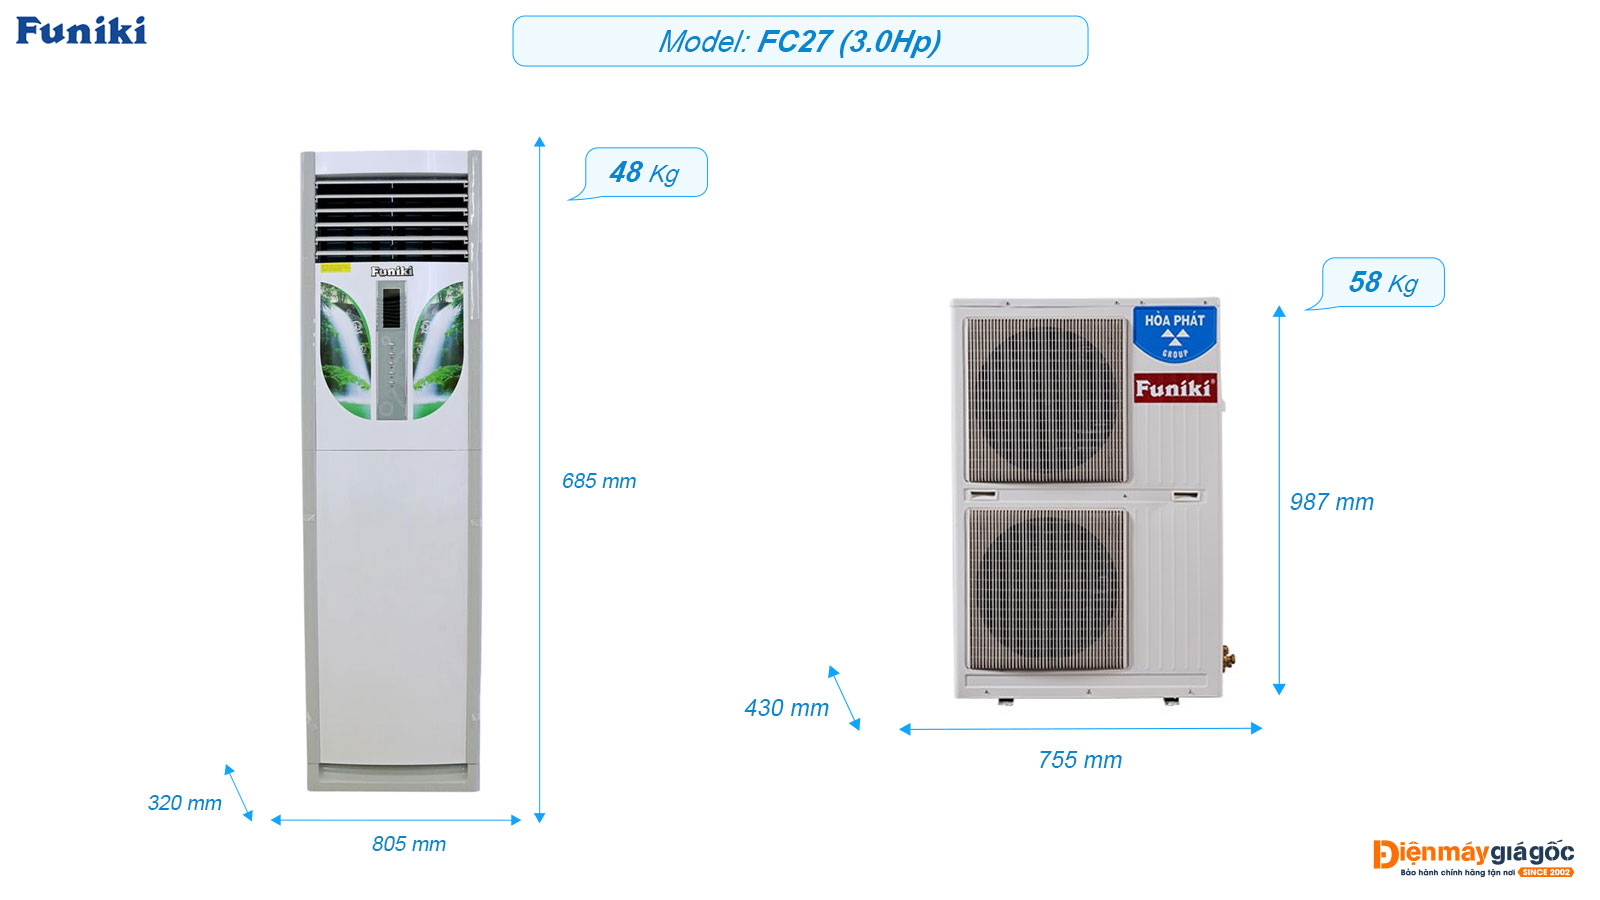 Funiki Floor standing air conditioning FC27 (3.0Hp)